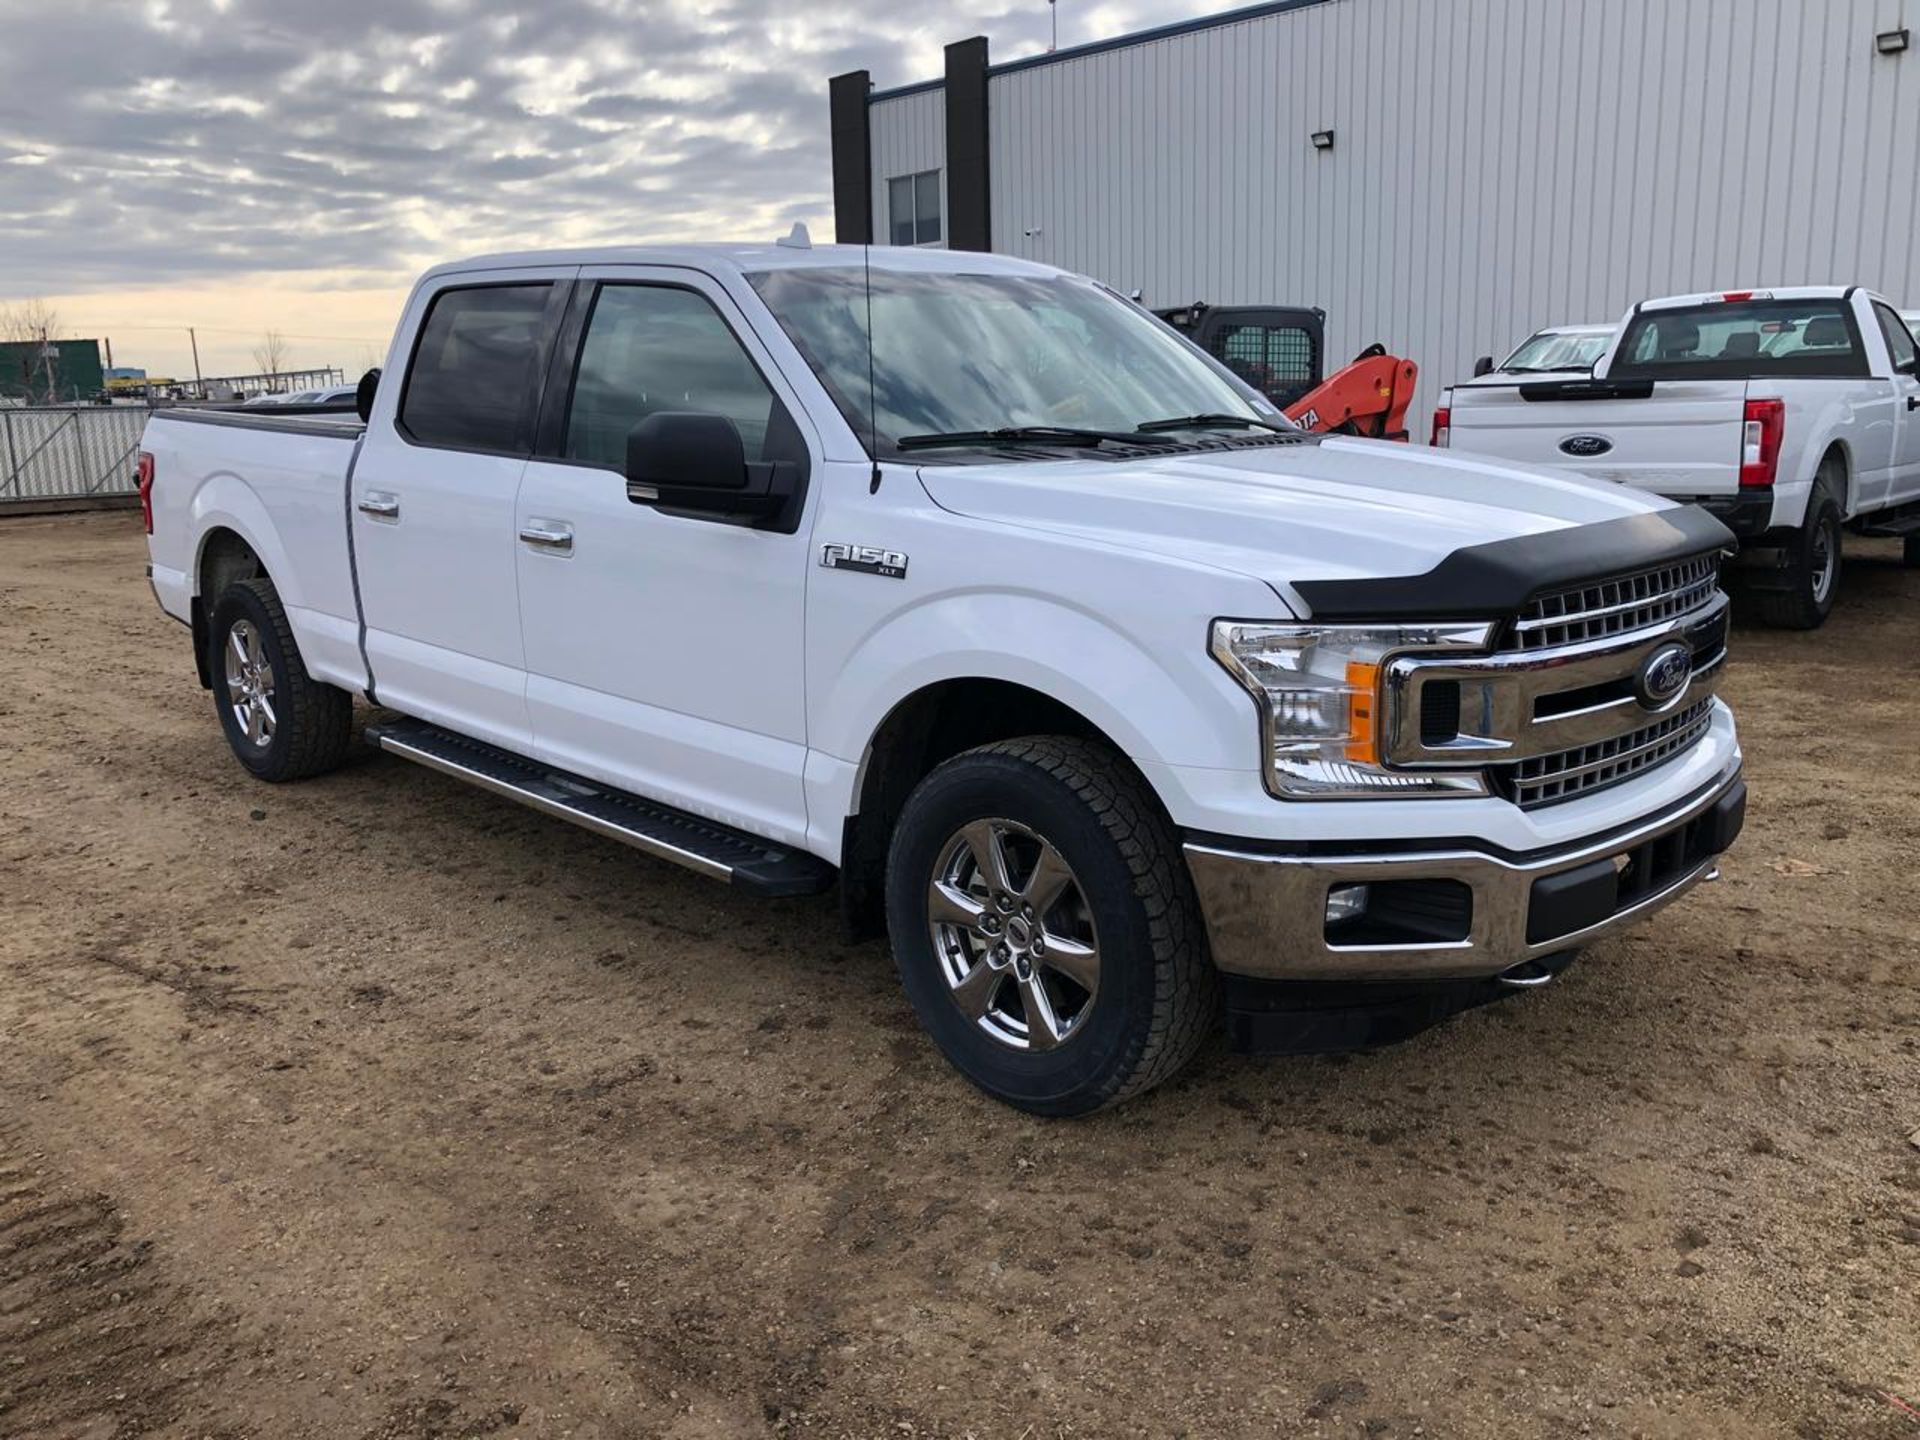 2018 Ford F150 Pick-up Truck - Image 3 of 13